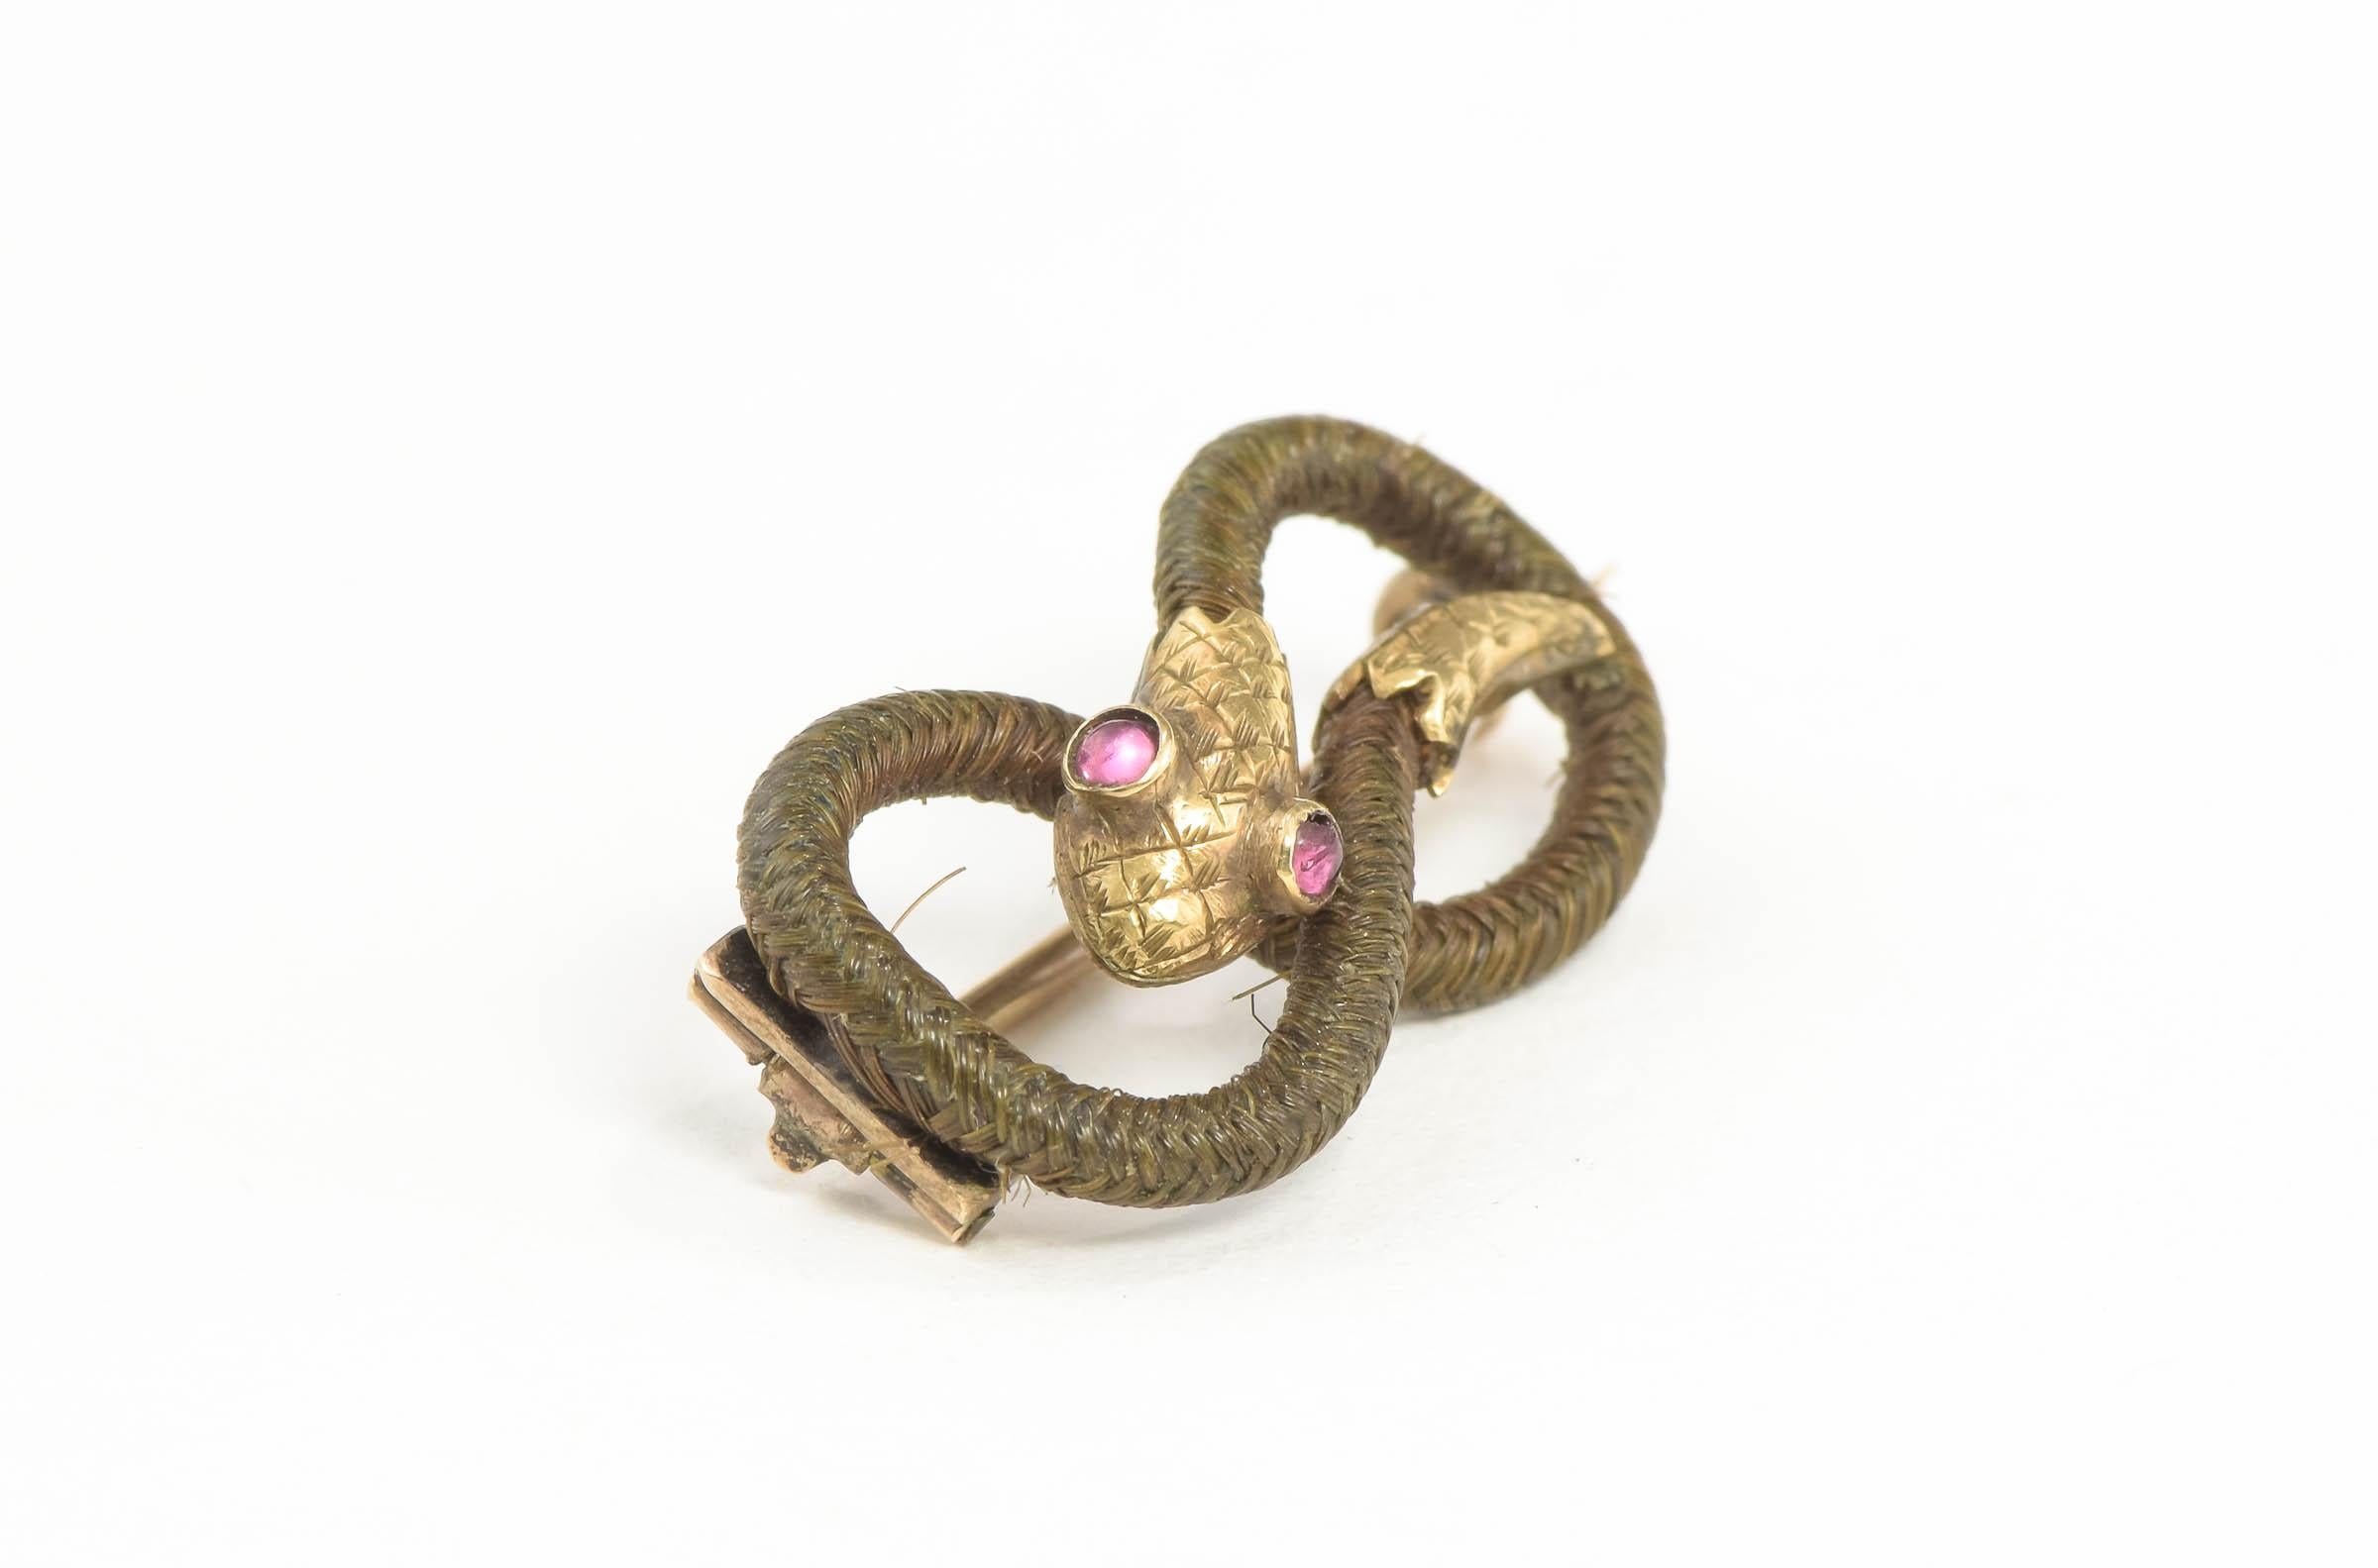 Crafted of gold testing at a minimum of 9K - 10K and hairwork, the brooch pin features a sinuously designed snake in a sentimental eternity knot design. All original, the snake's head and tail are lovingly detailed. This could be a memorial/mourning